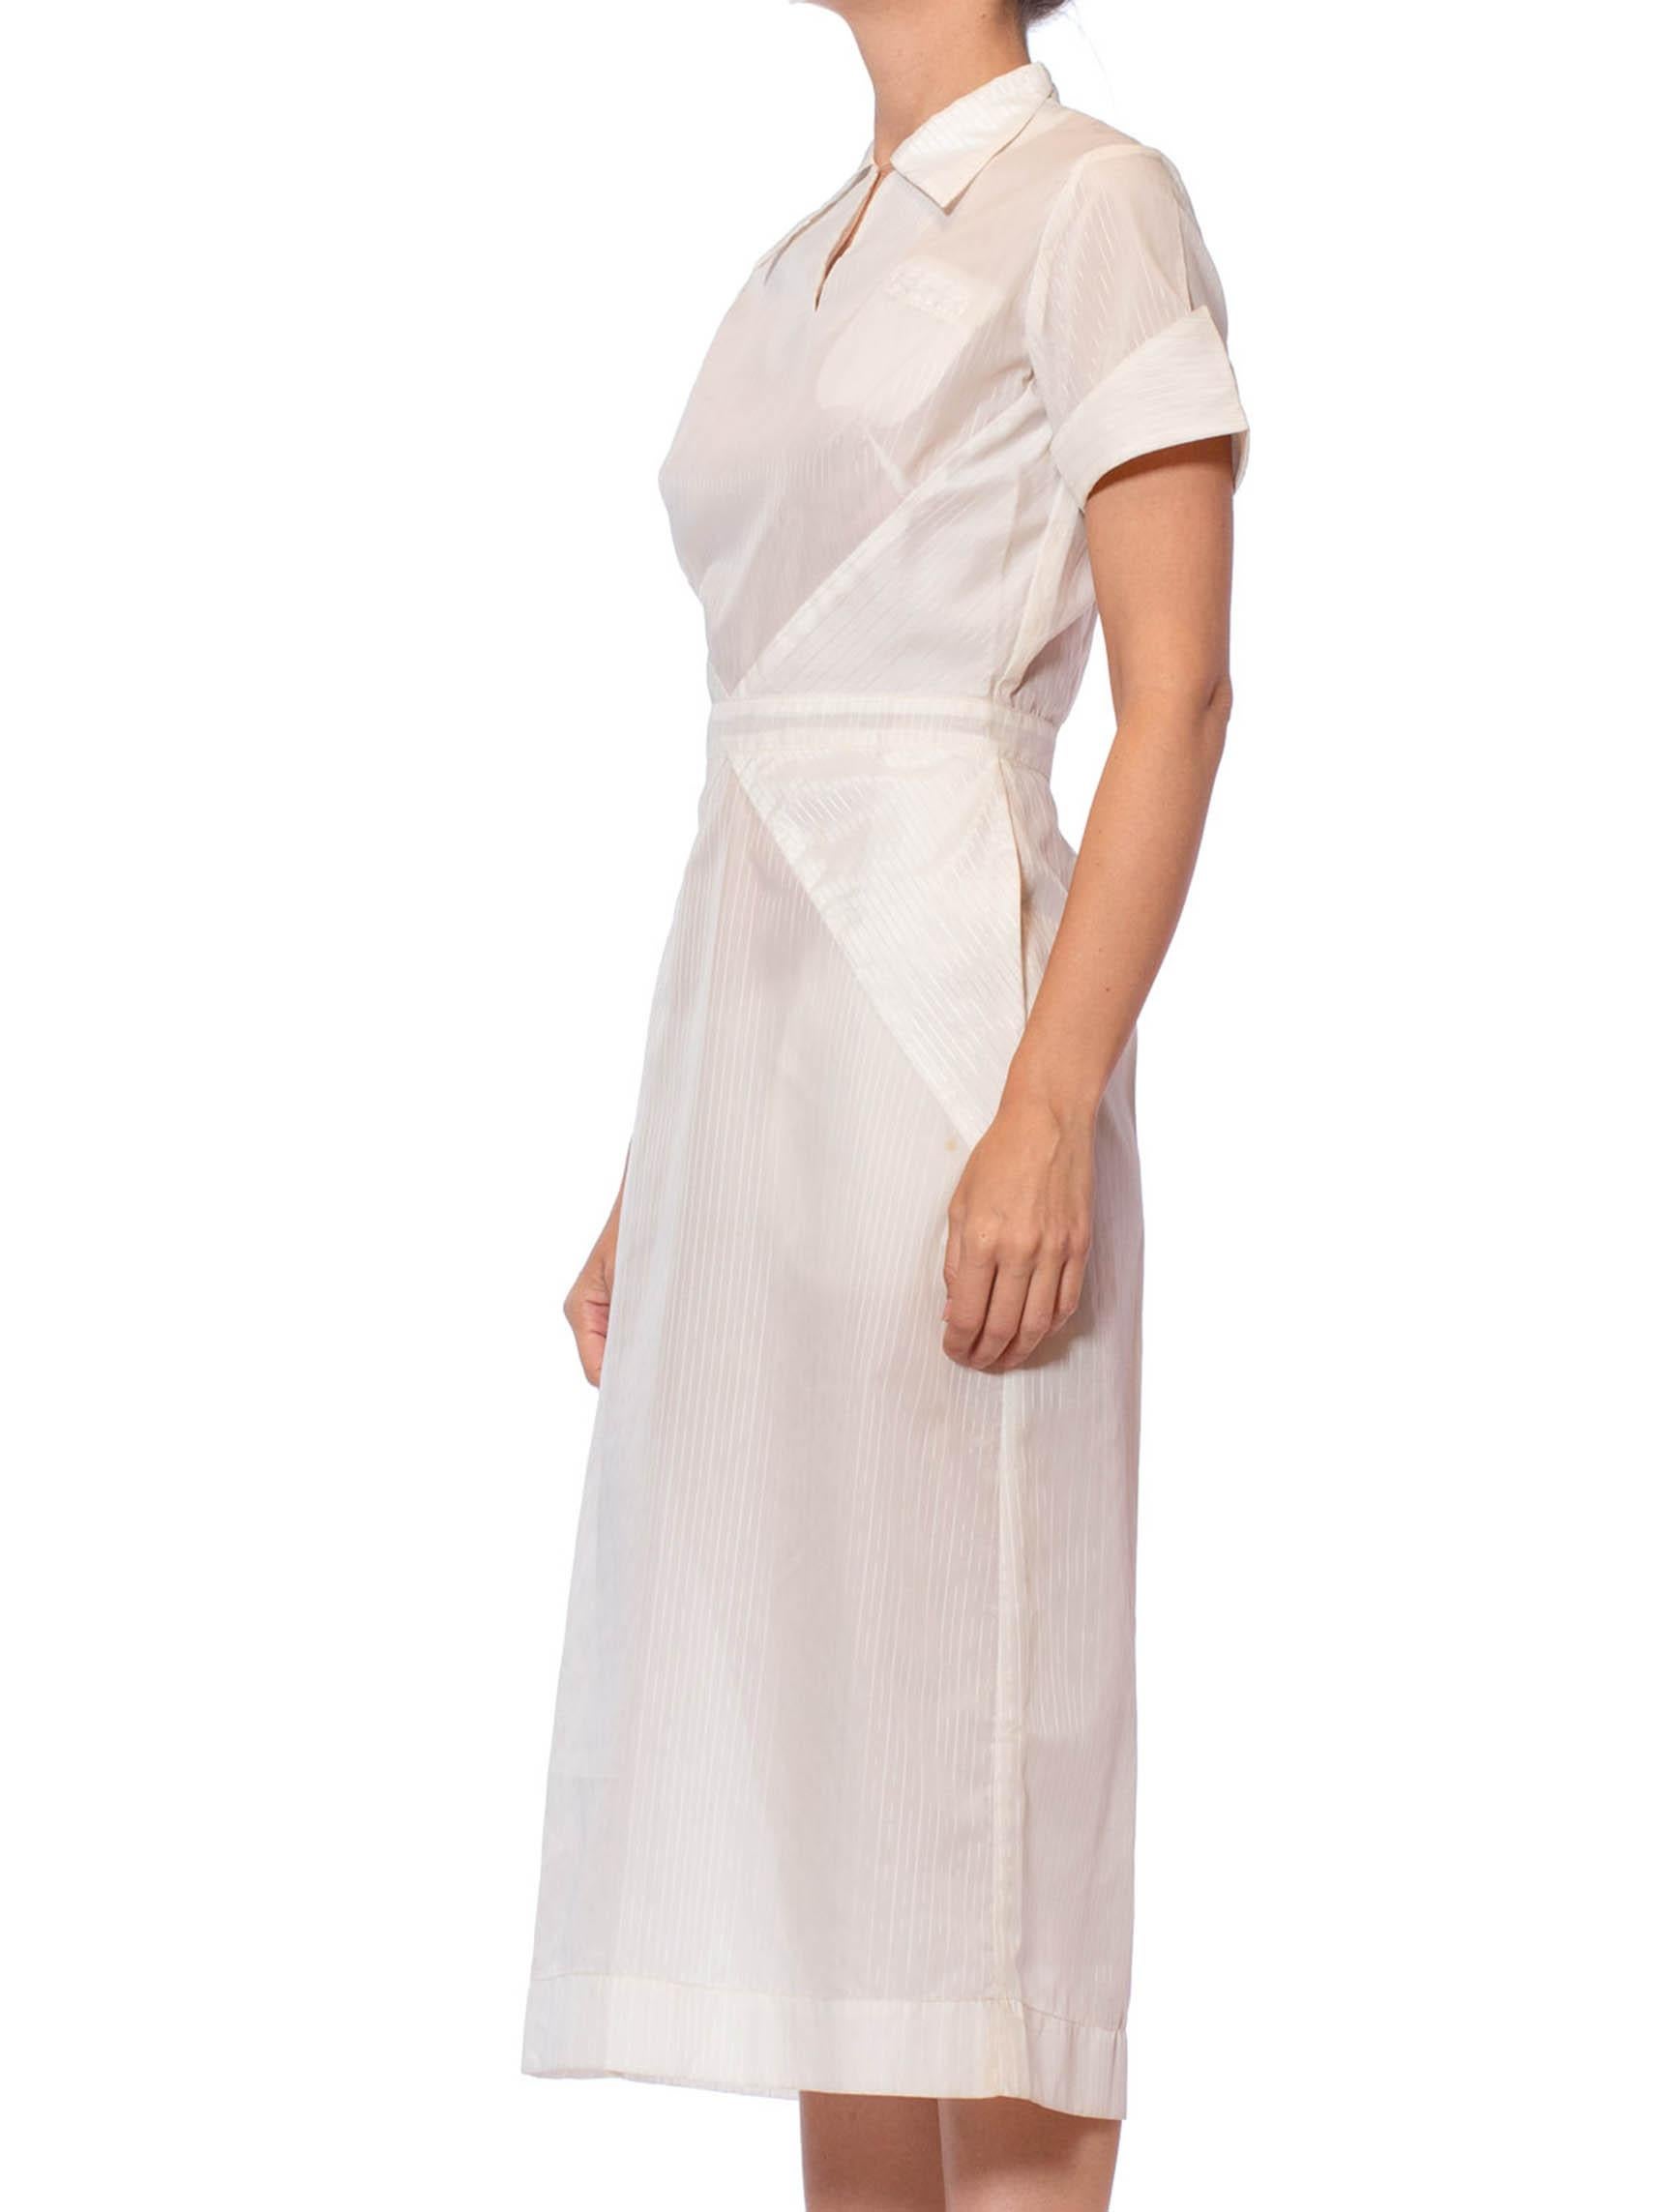 1950S White Nylon Pin-Up Nurse Uniform Dress In Excellent Condition For Sale In New York, NY